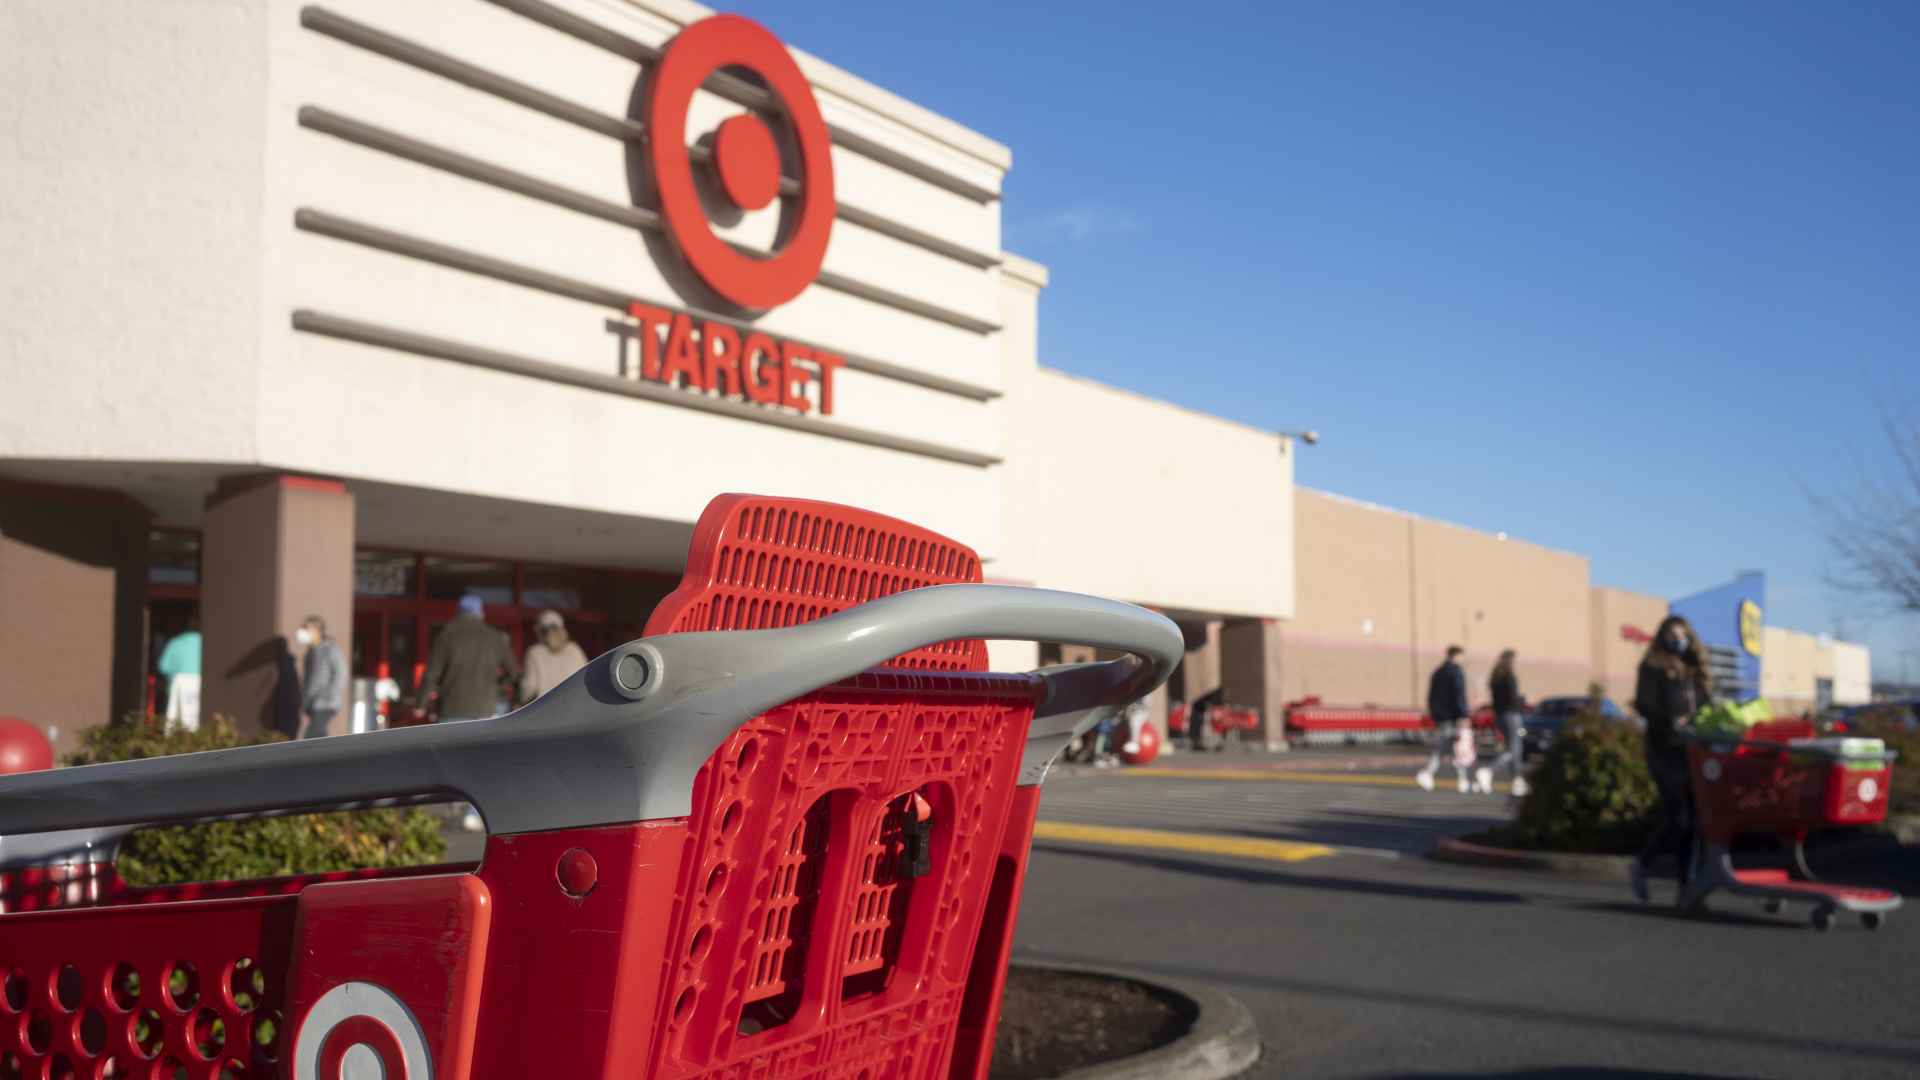 target employees reveal the 9 best buys for your money